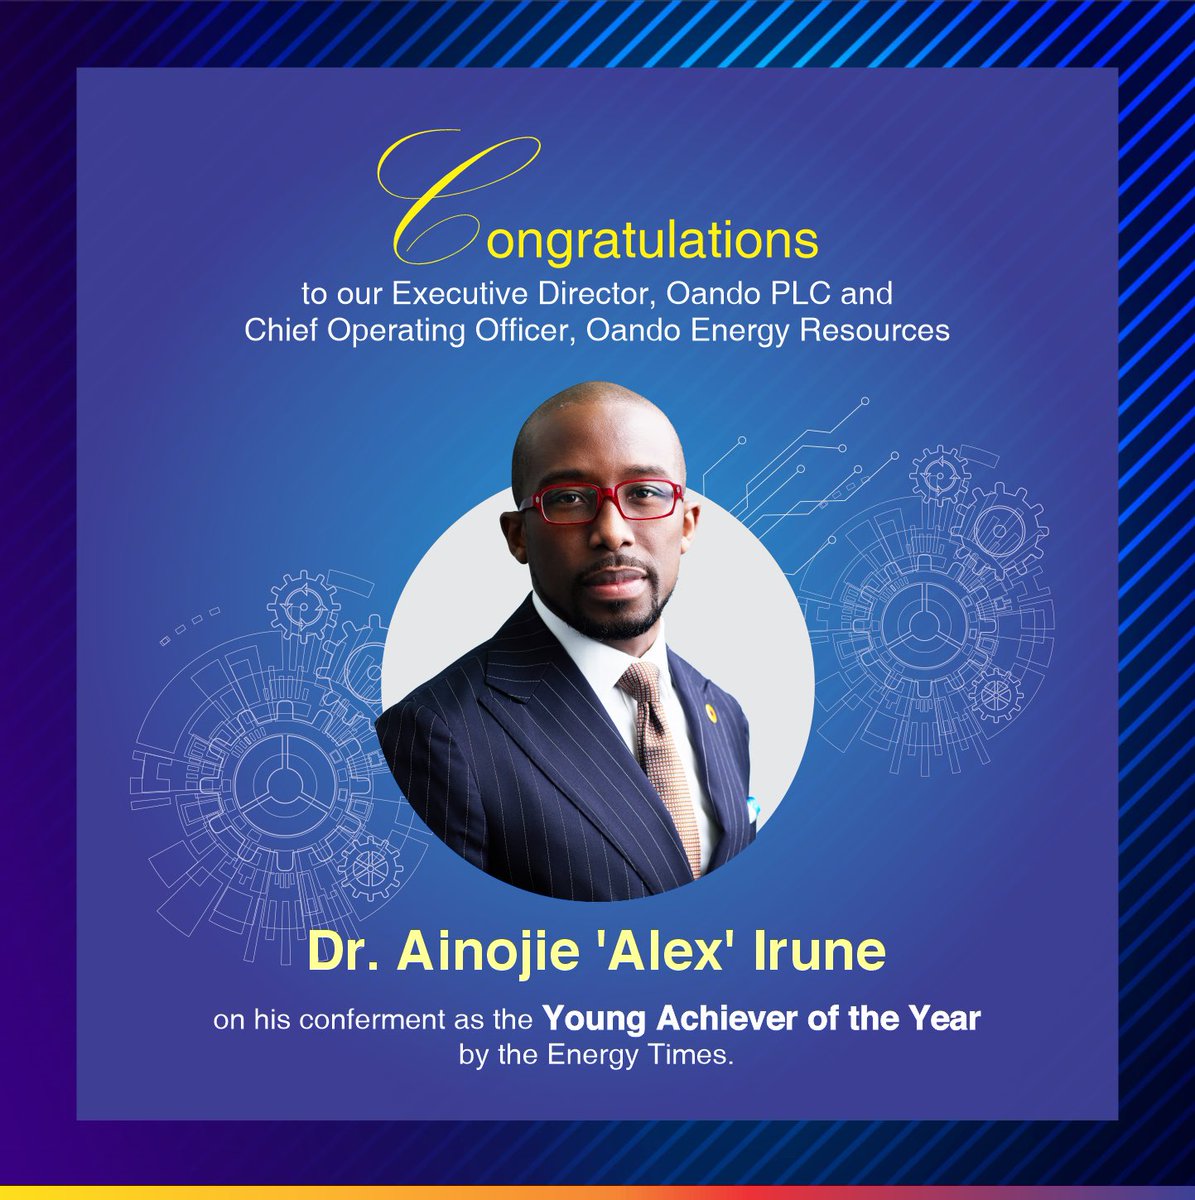 A standing ovation for our Executive Director, Oando PLC, @airune, on his conferment as the Young Achiever of the Year at the Energy Times Award Ceremony. The award is in recognition of his innovative thinking, dedication and invaluable contribution to the growth of Africa’s